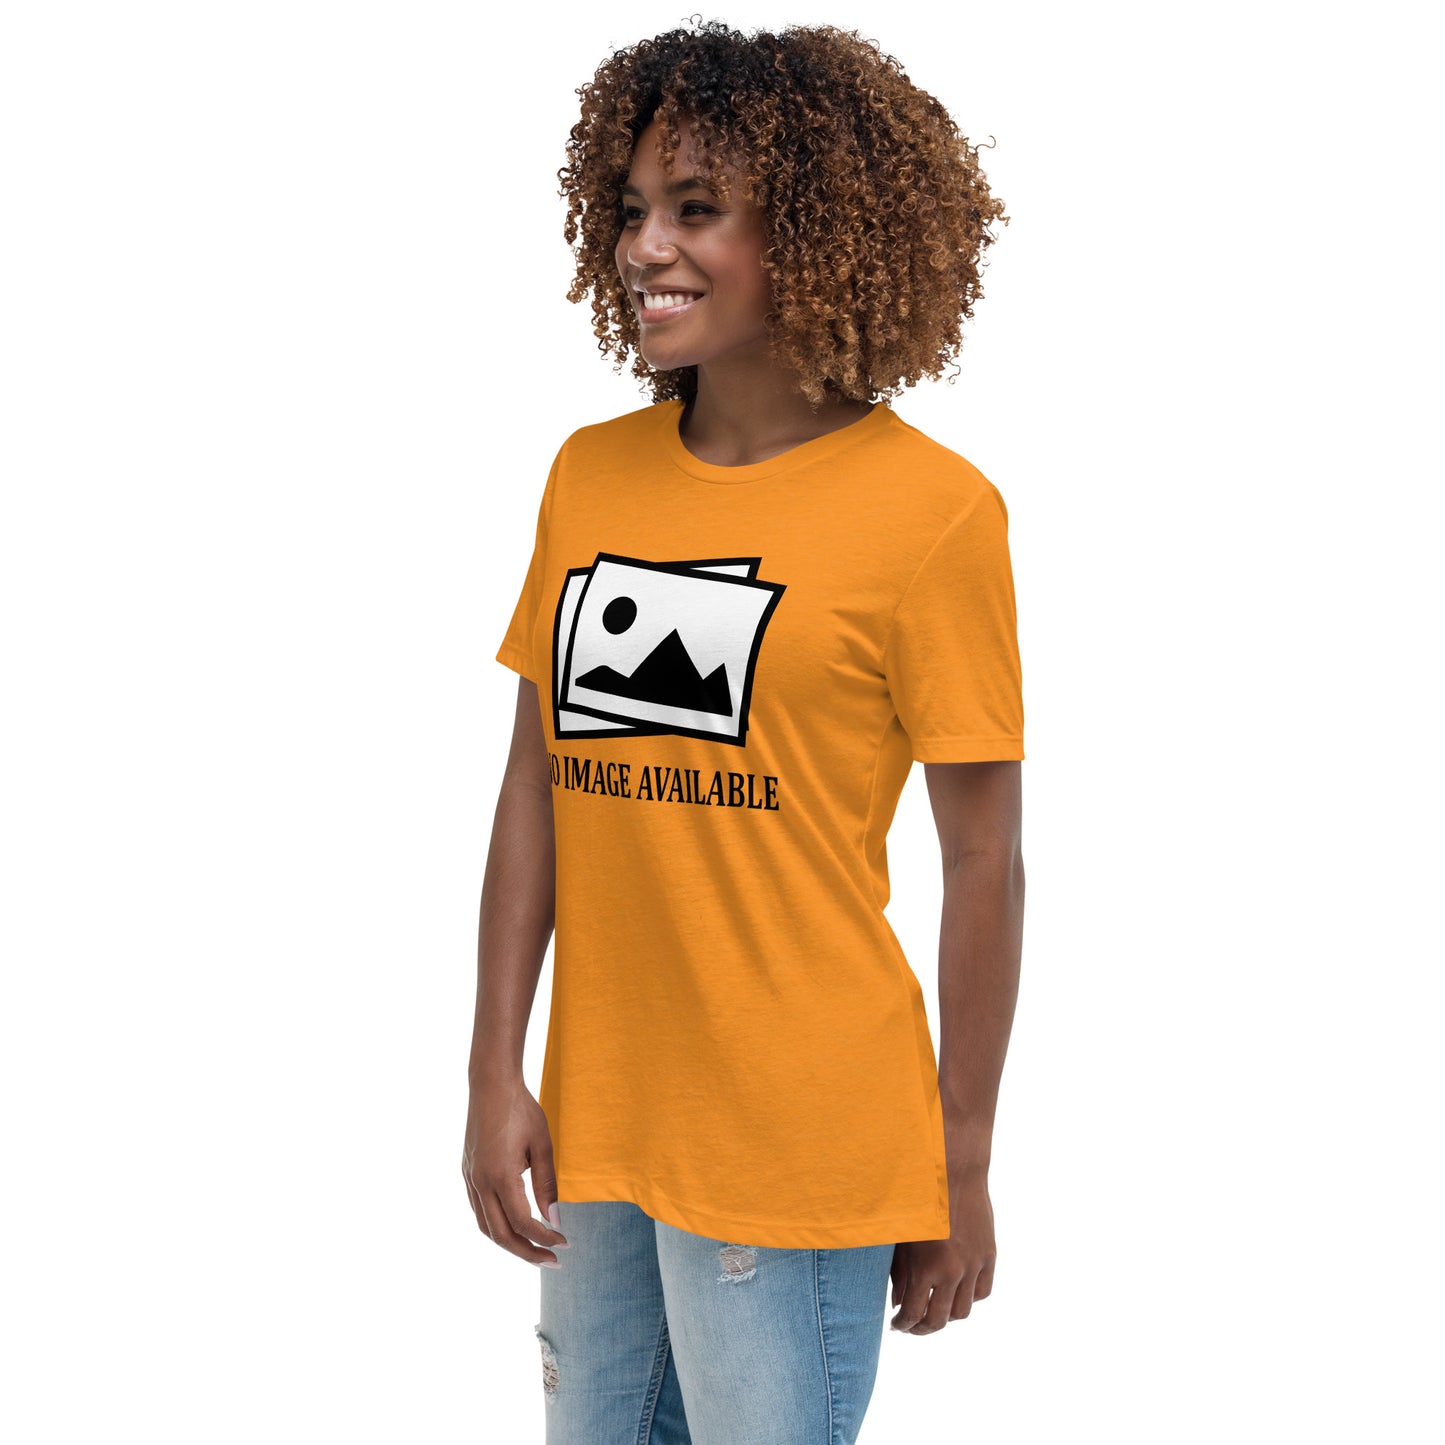 Women with marmalade  t-shirt with image and text "no image available"